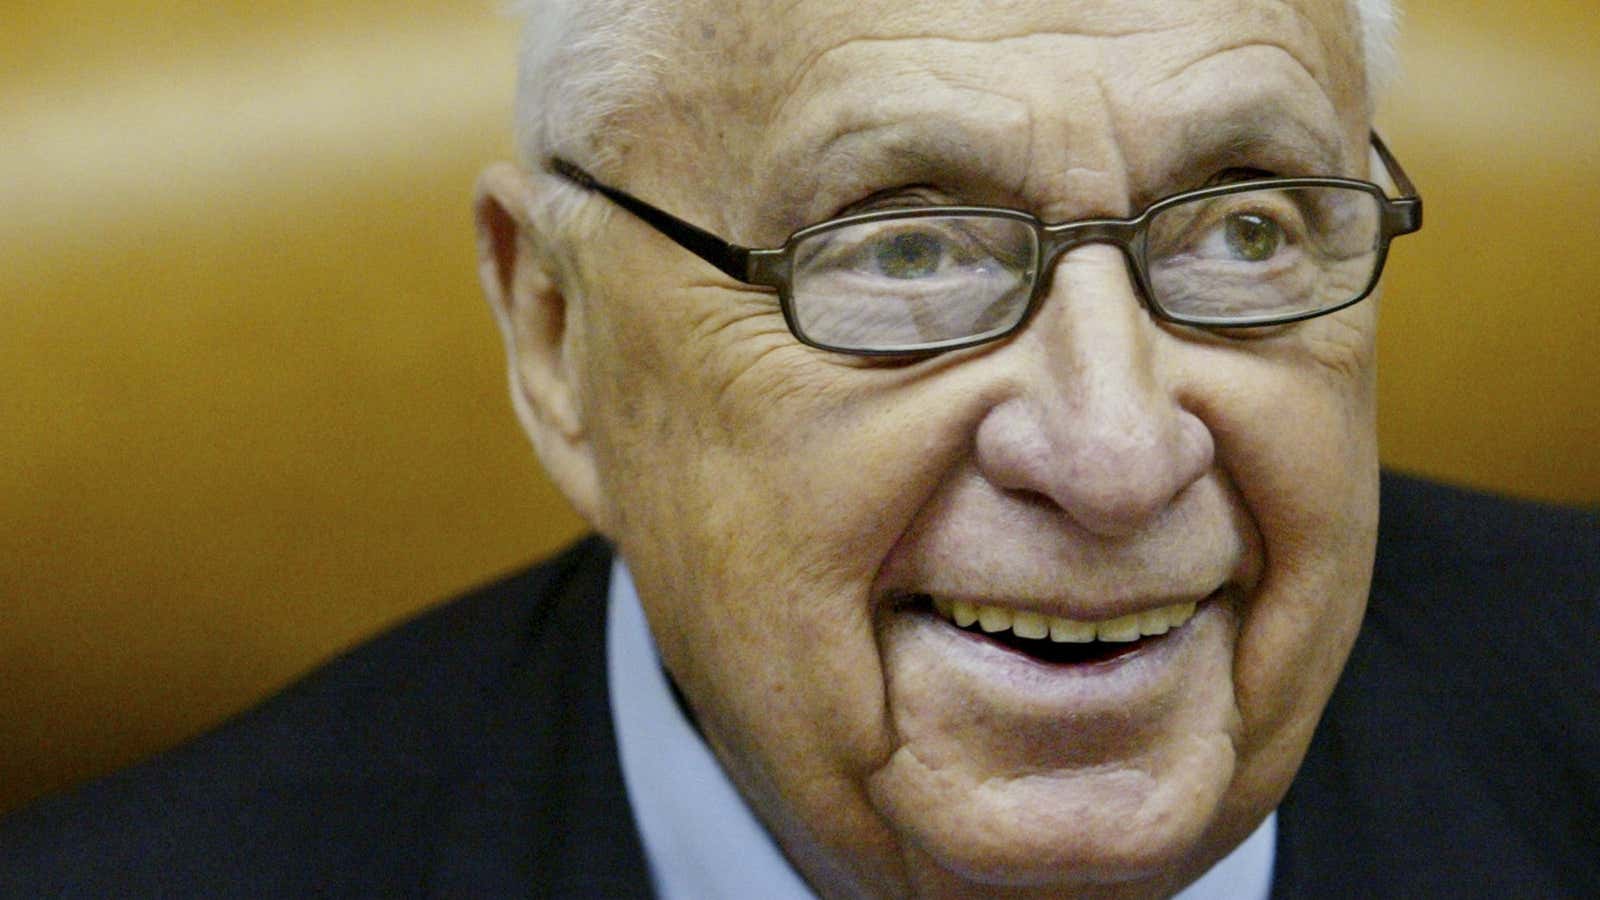 The status quo in Israel and the Palestinian territories can be traced to Ariel Sharon.